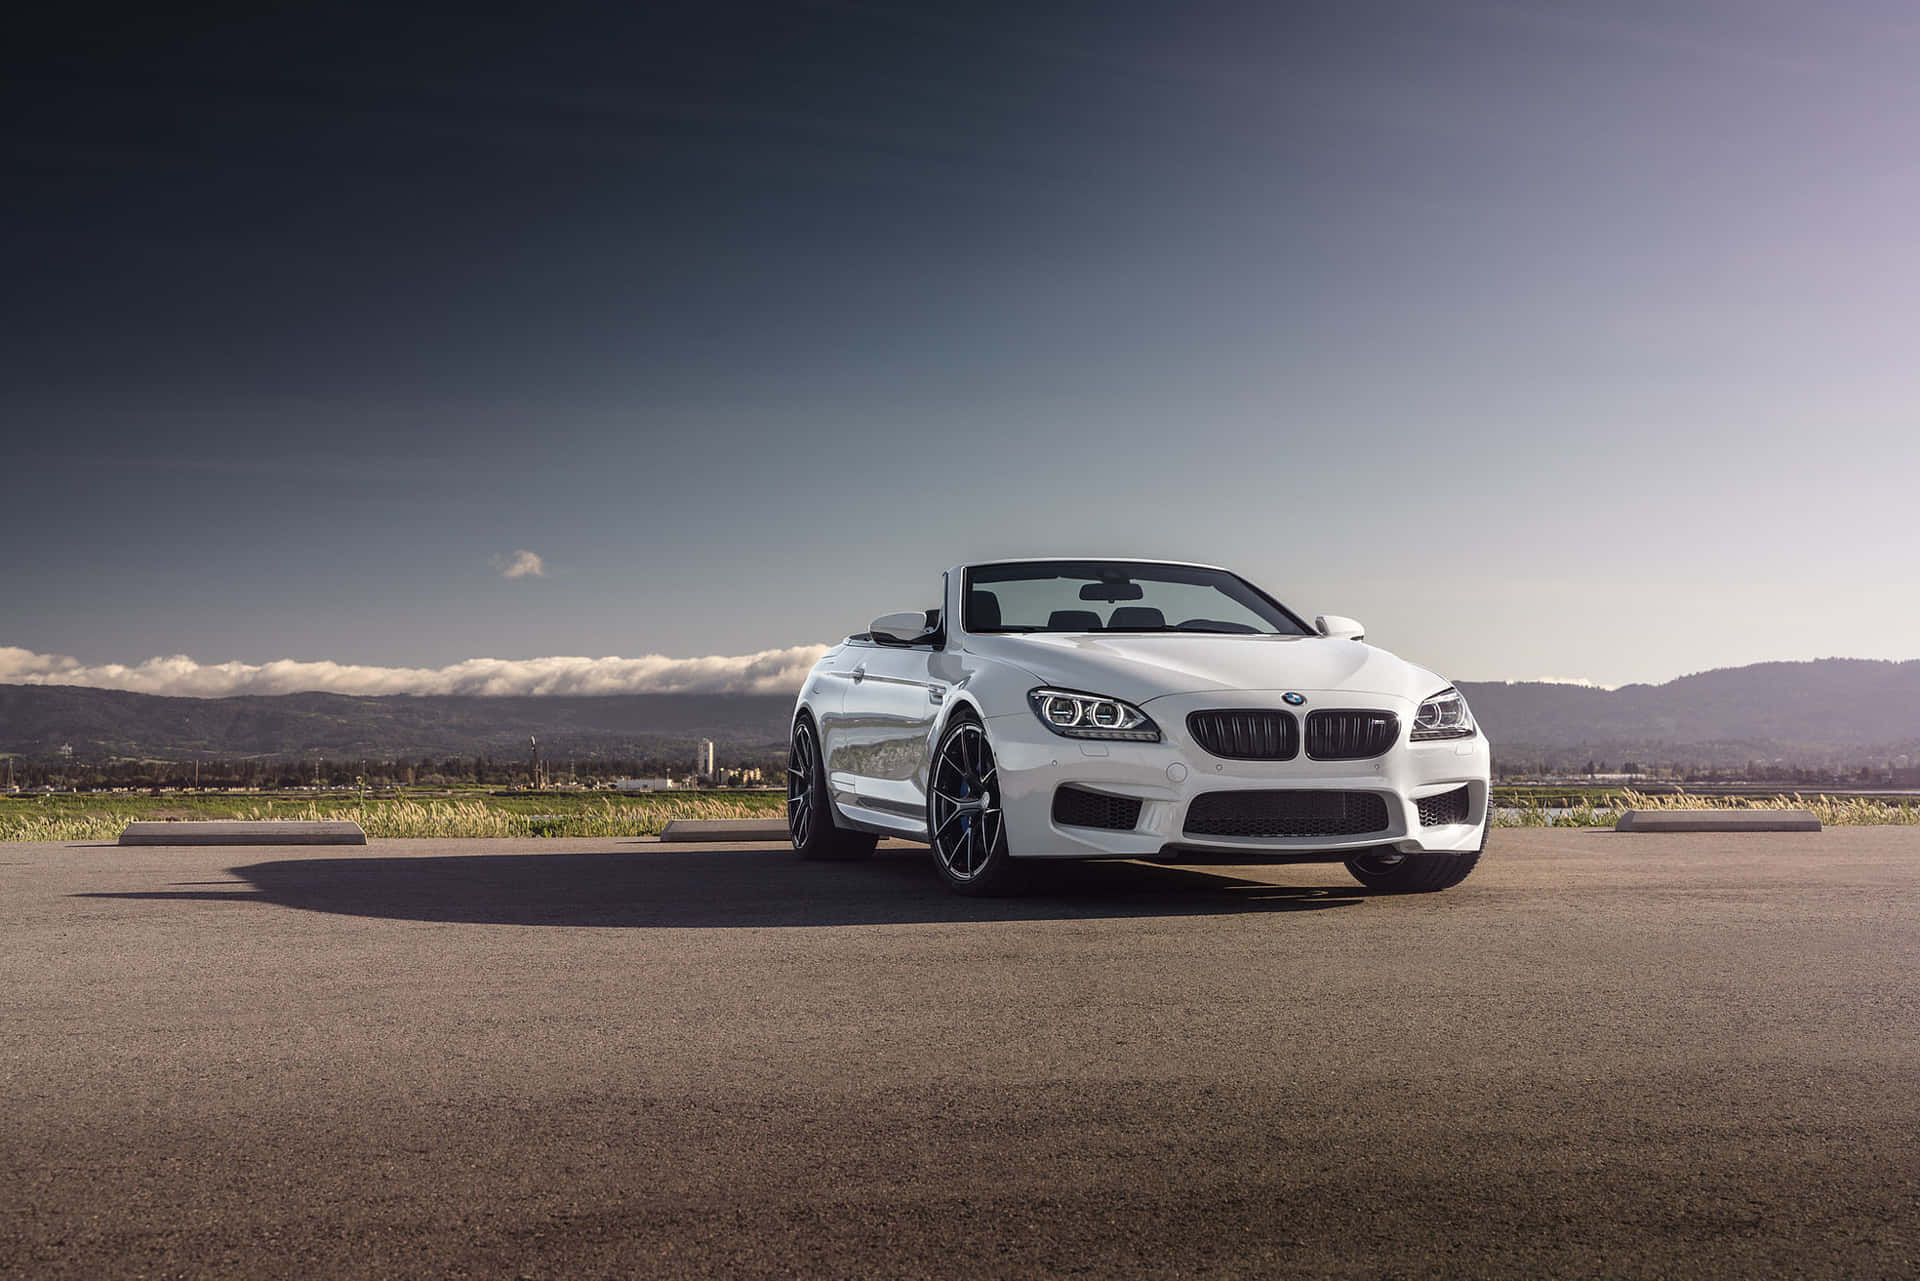 Captivating BMW M6 in All Its Glory Wallpaper